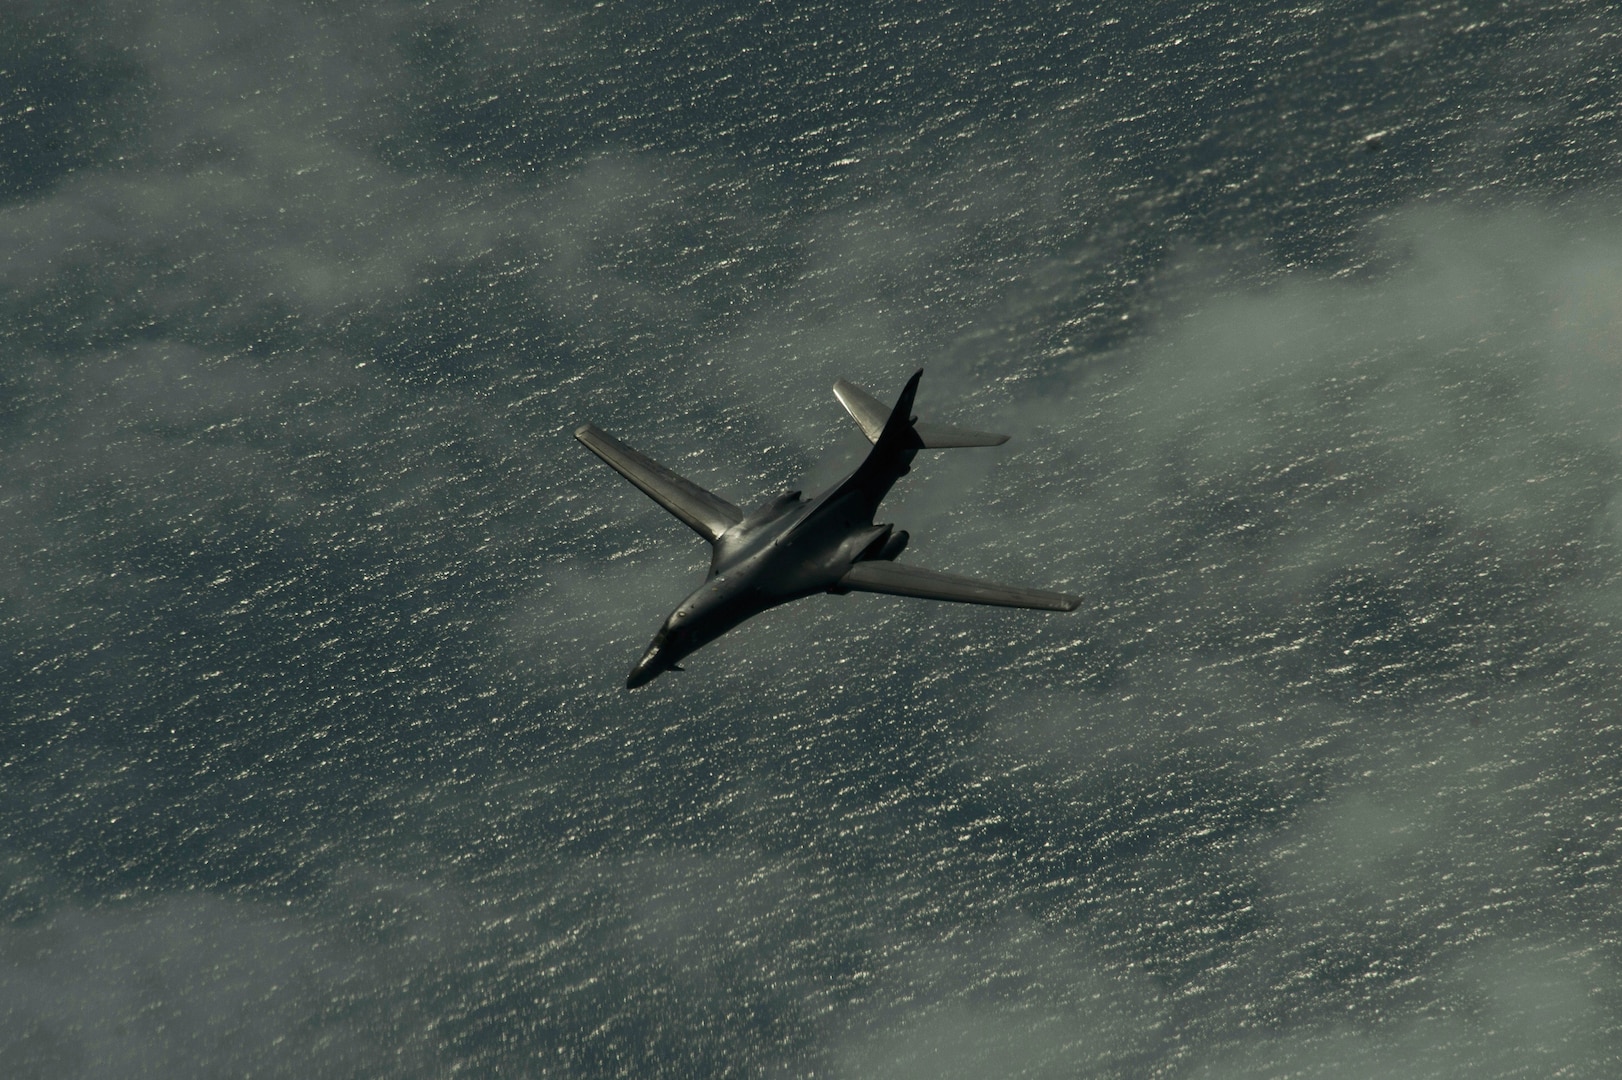 B-1B Lancer, 28th Bomb Wing, participates in Baltic Operations Exercise over Baltic Sea, June 9, 2017 (U.S. Air Force/Jonathan Snyder)